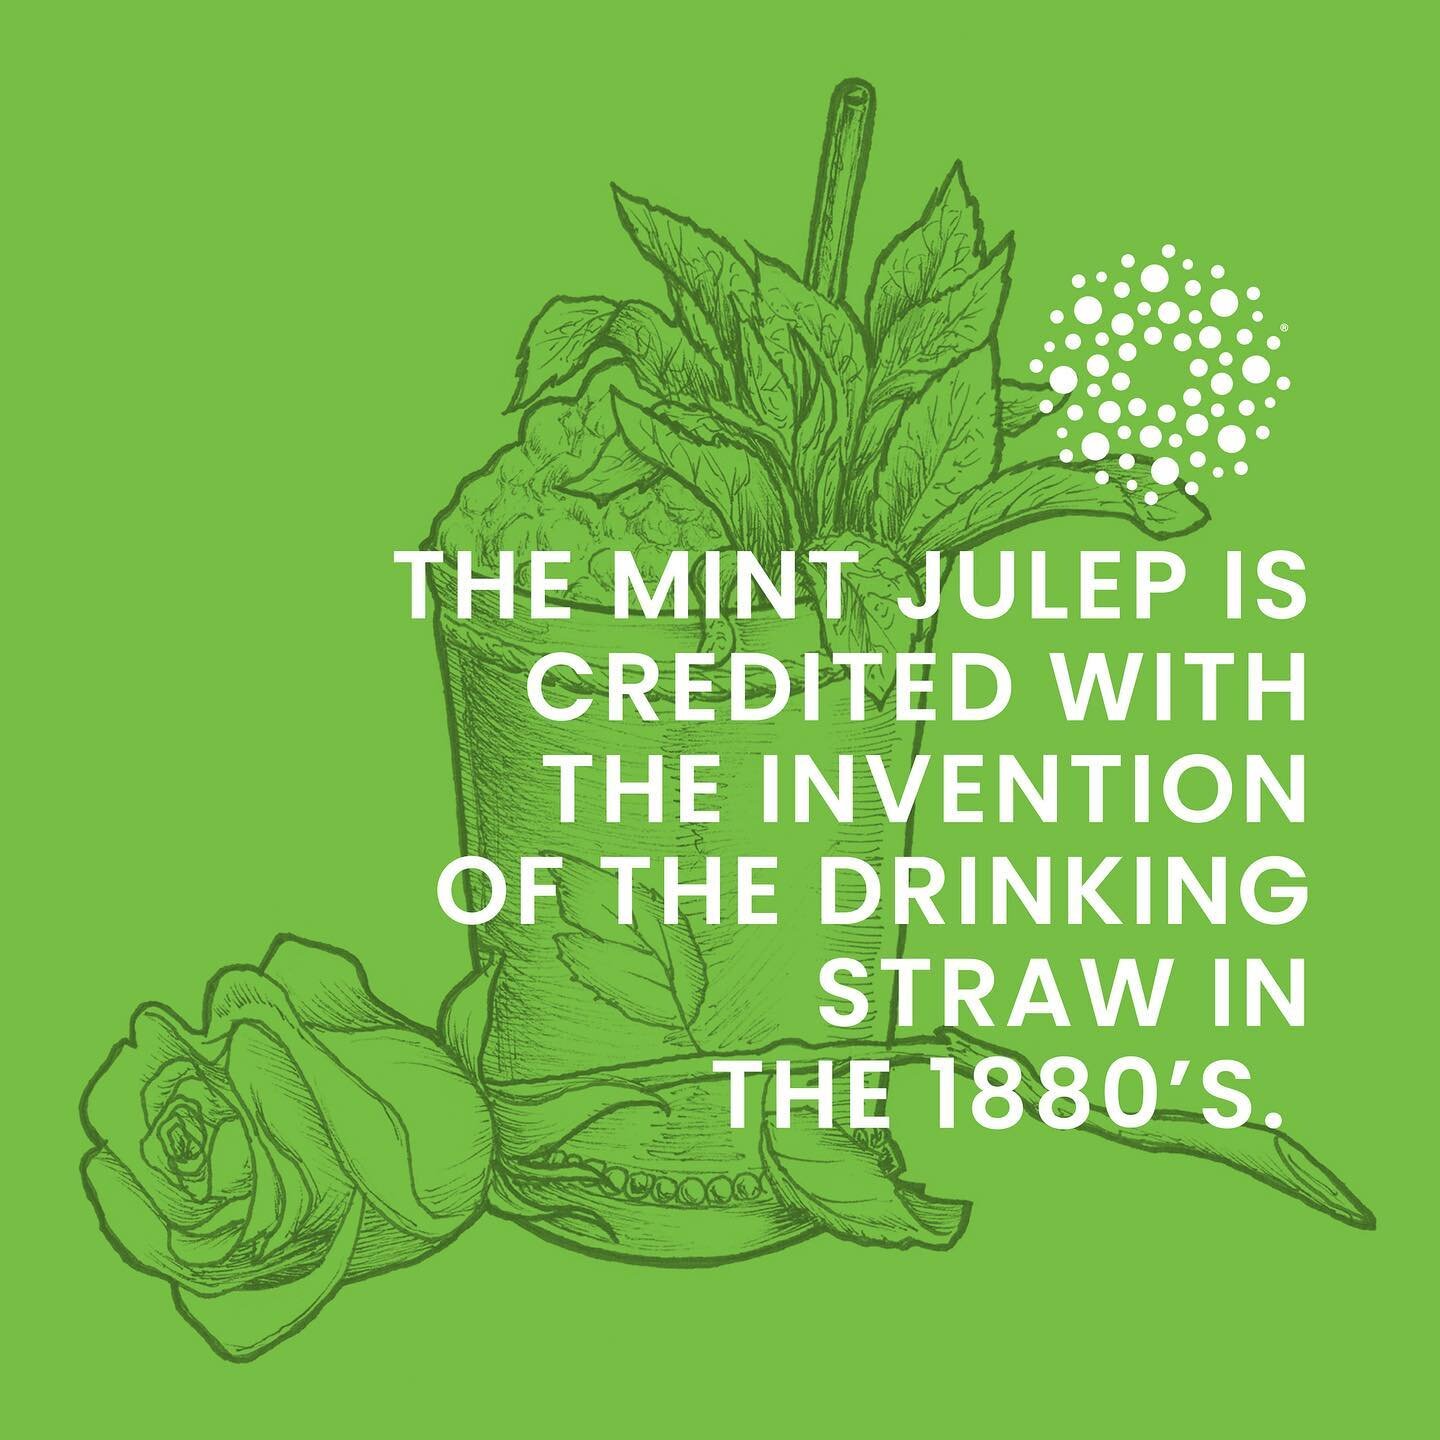 The mountain of crushed ice that comprises the top of The Mint Julep required some inventive thinking to get to the goods at the bottom of the cup.